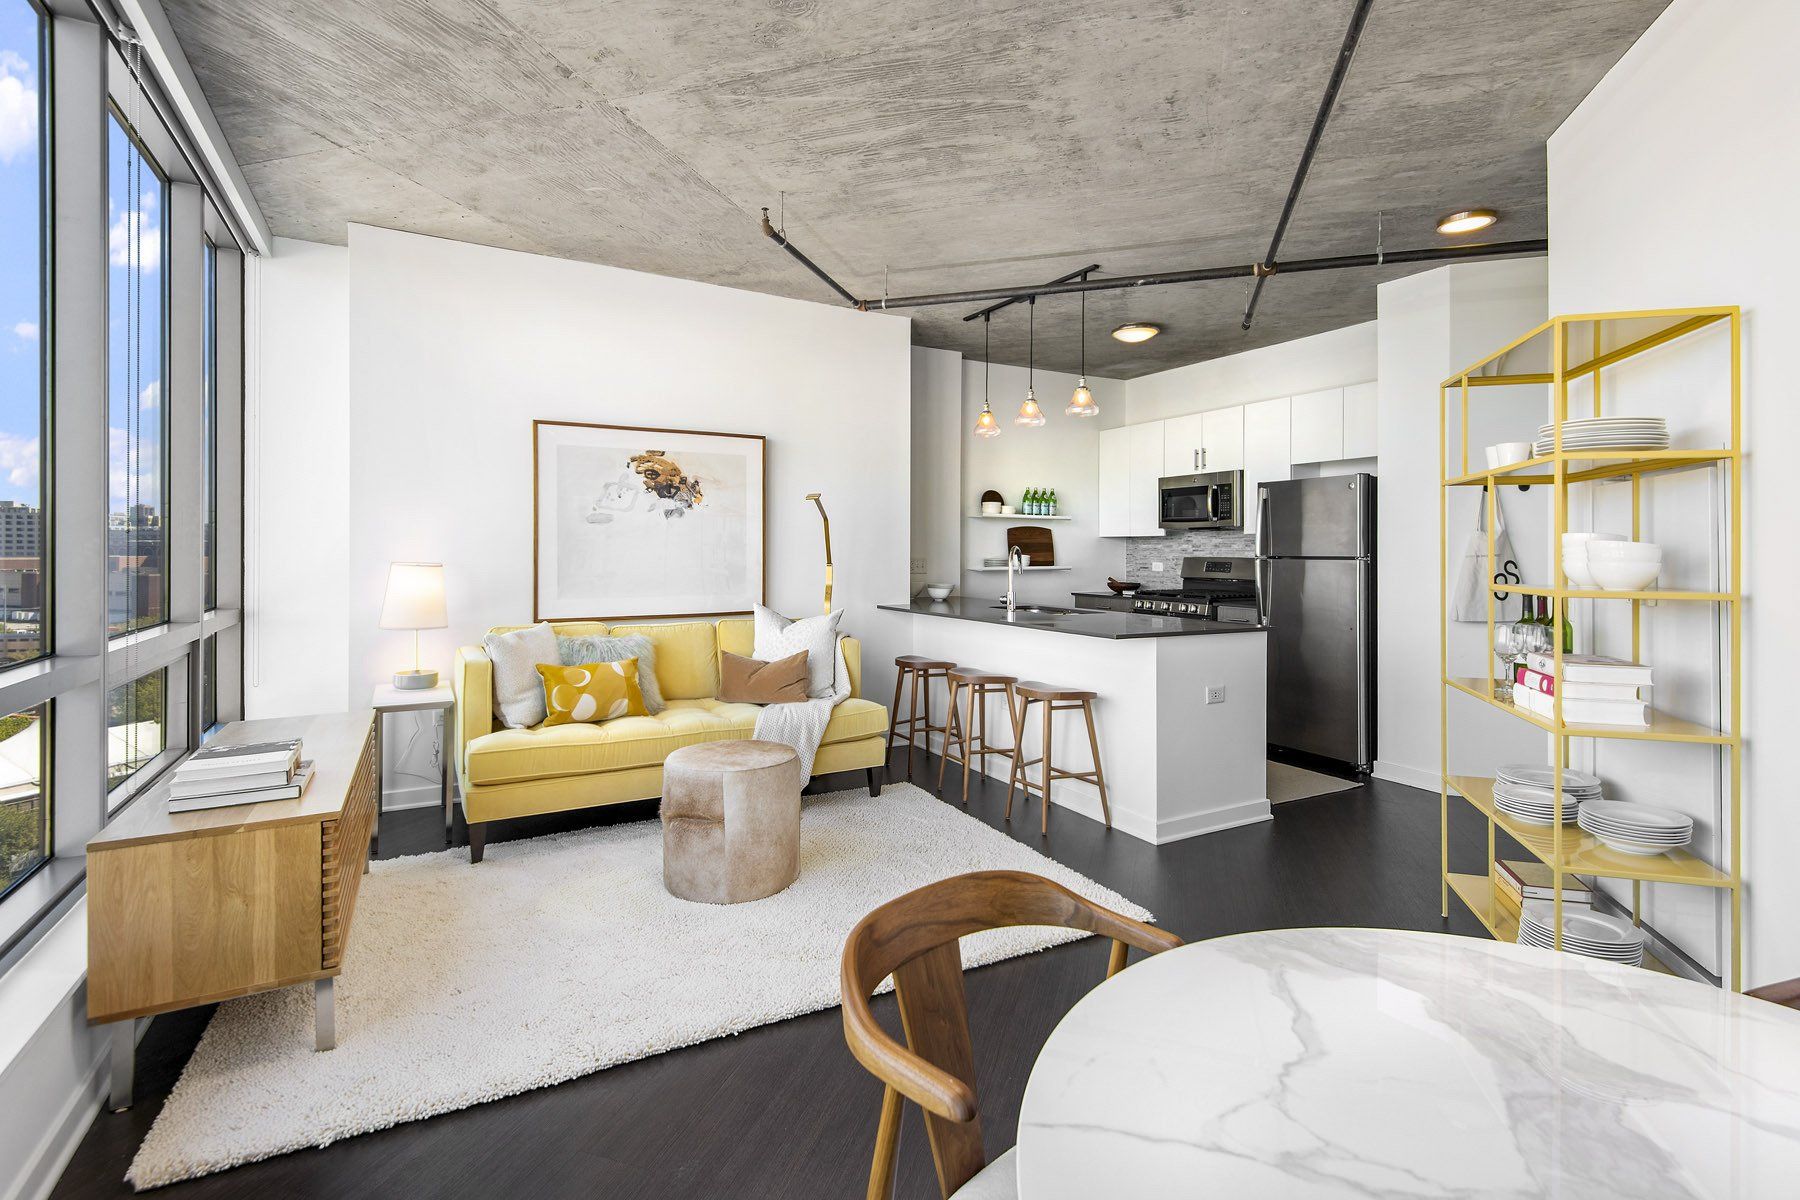 Modern apartment with yellow decor and floor to ceiling windows at Reside on Green Street.